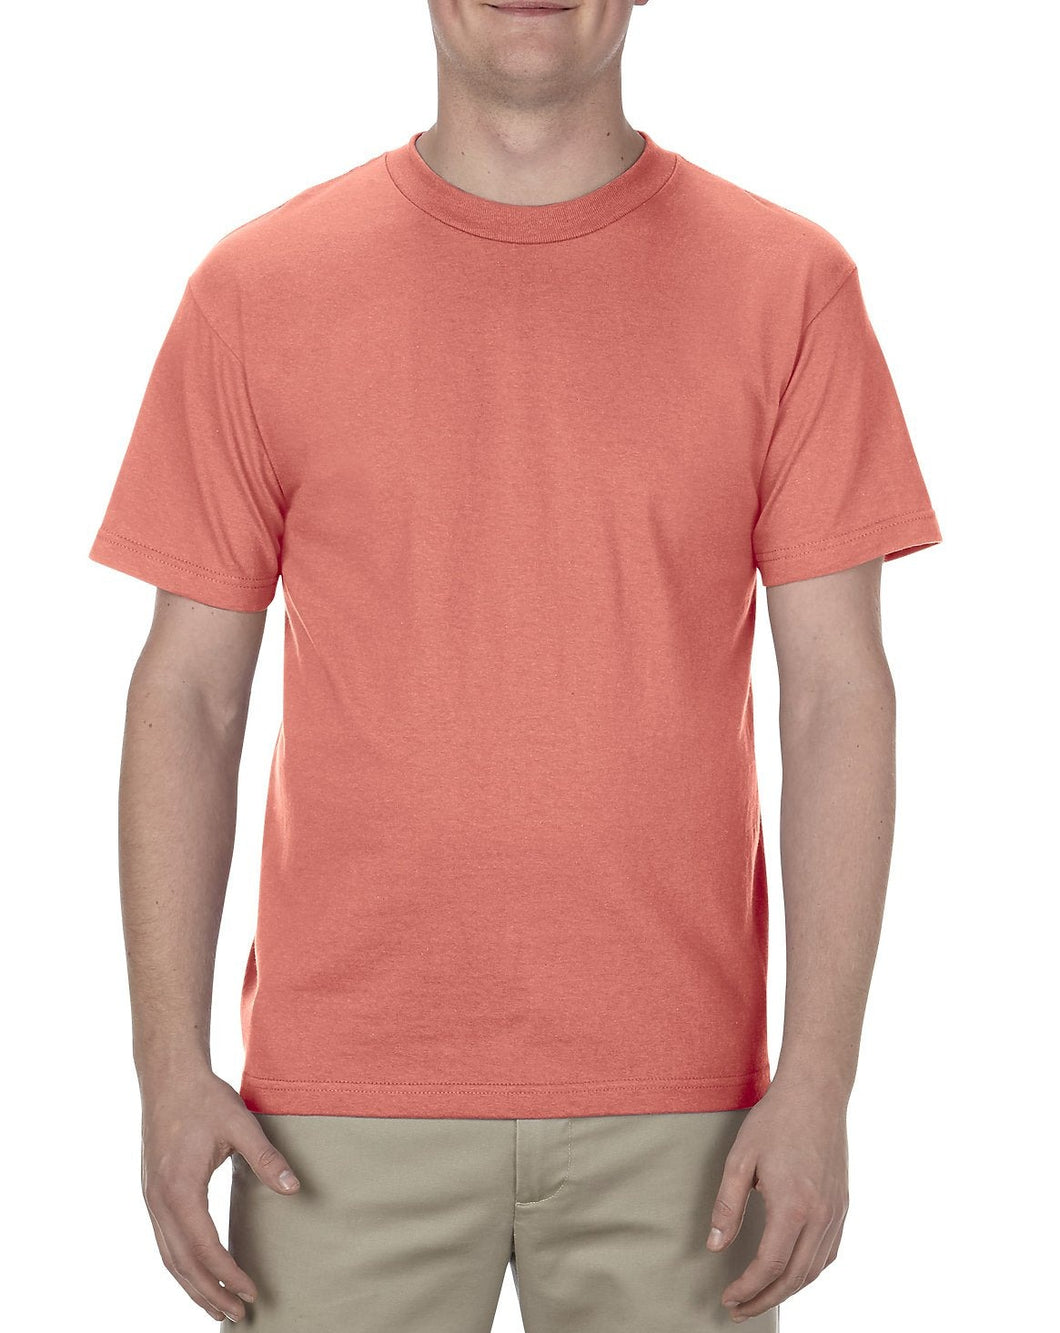 1301 Tee - Coral